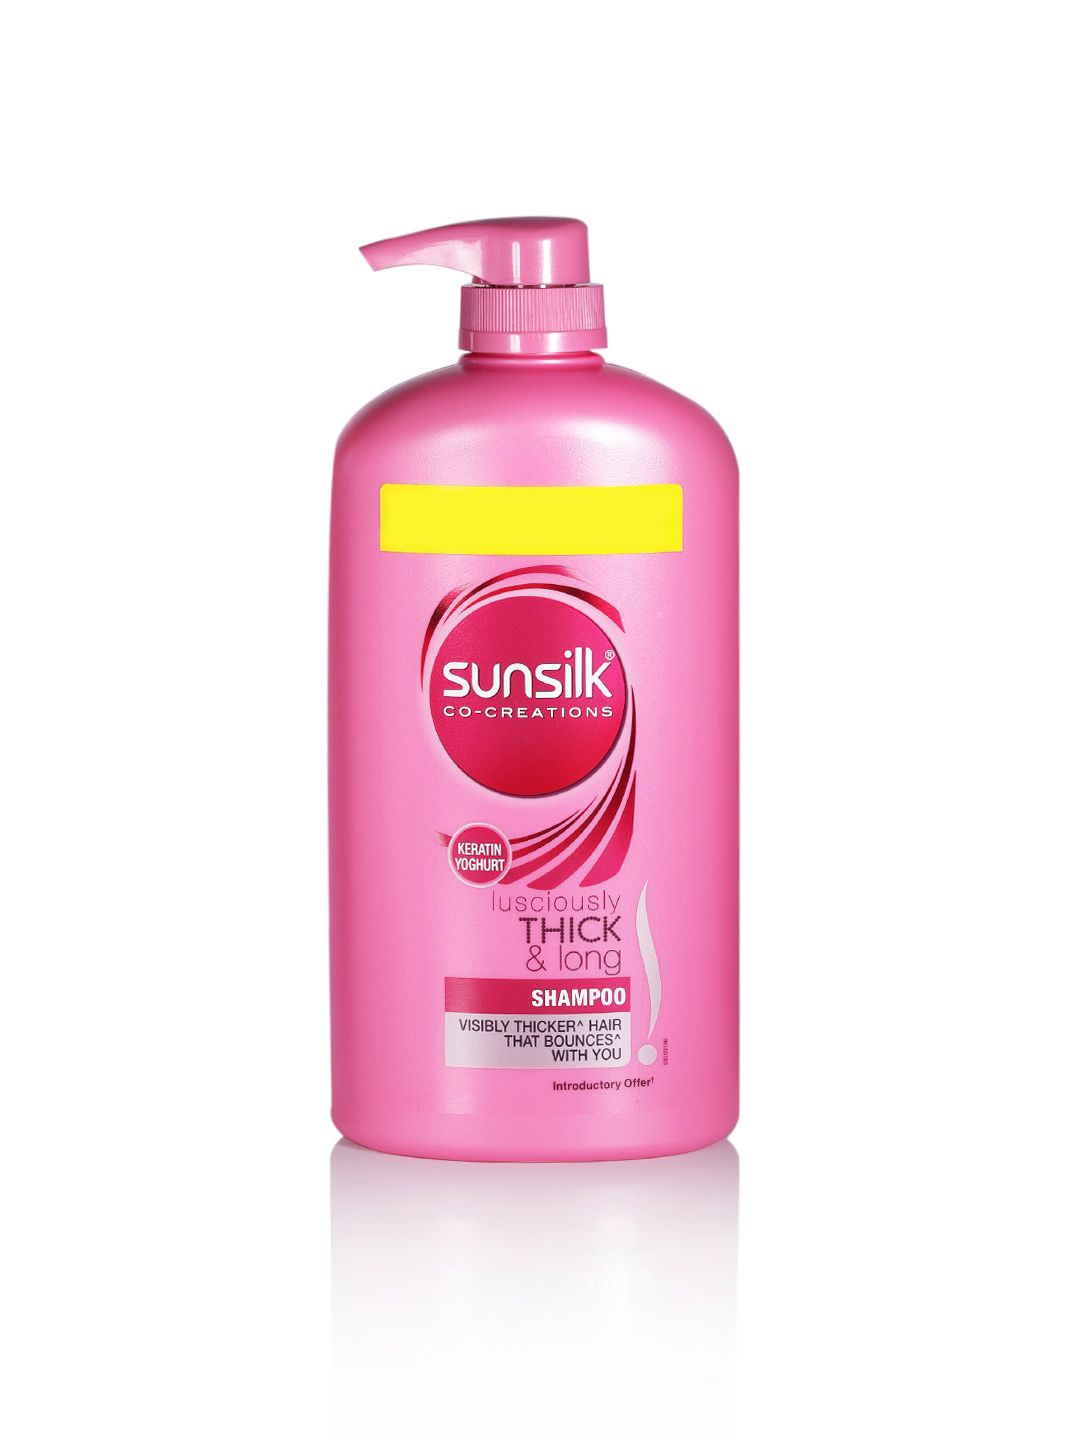 Sunsilk Lusciously Thick & Long Shampoo With Keratin & Macadamia Oil 1 Ltr Price in India